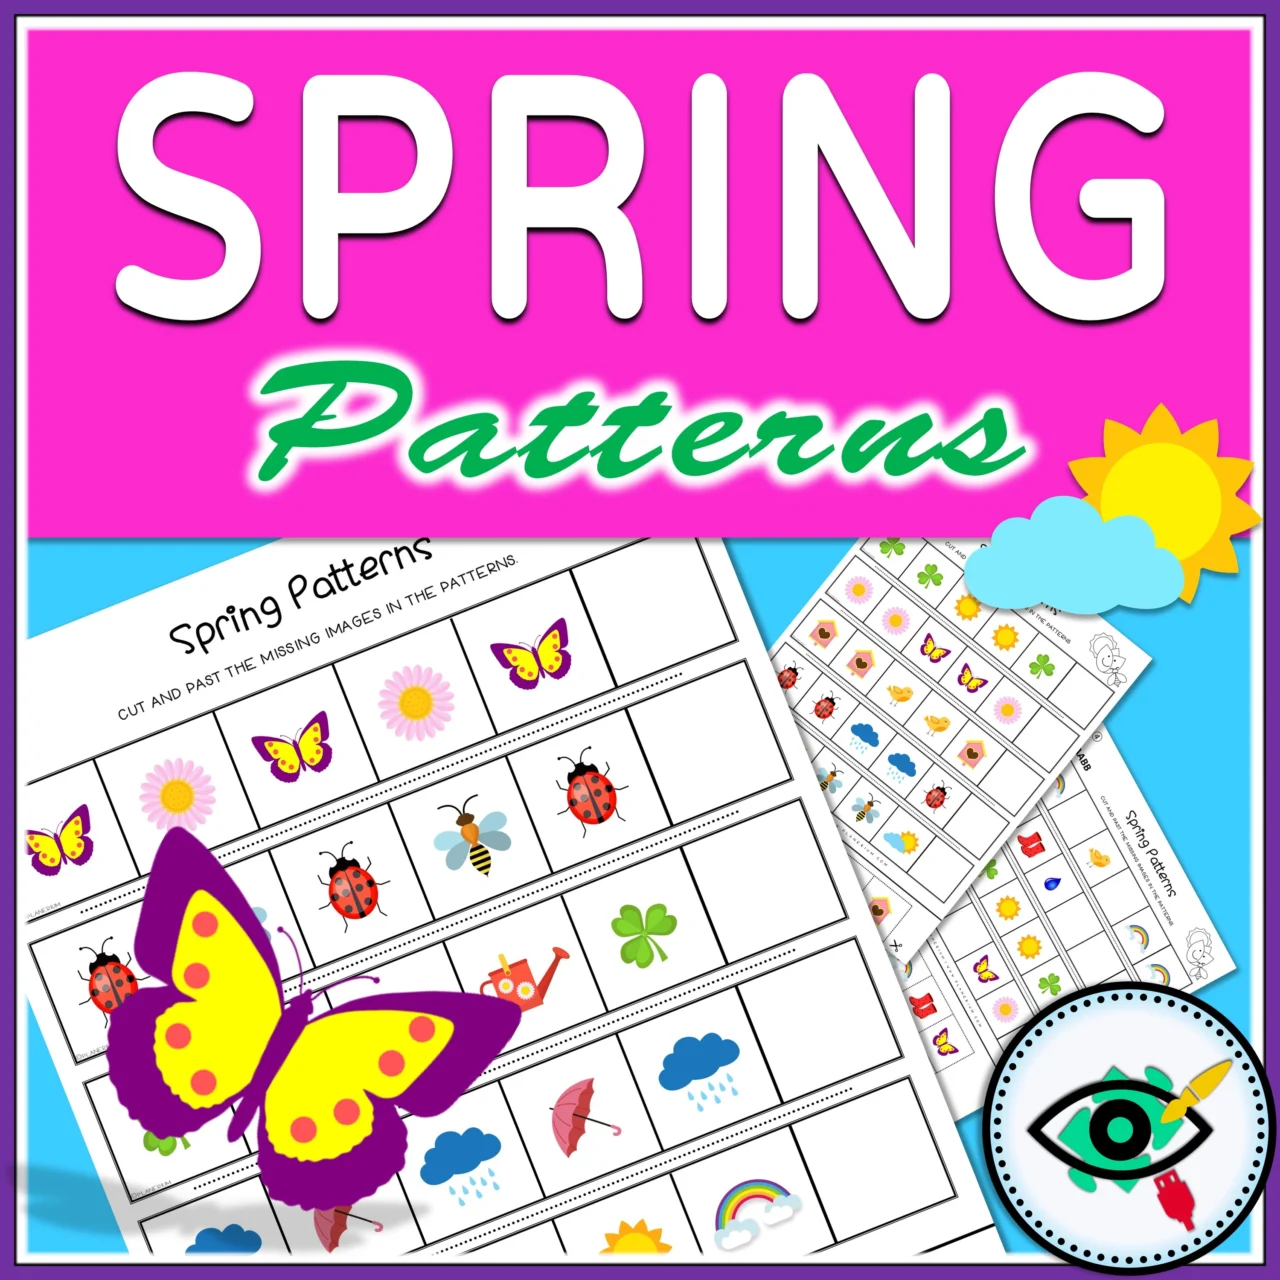 Spring - Patterns Activity - Image Title